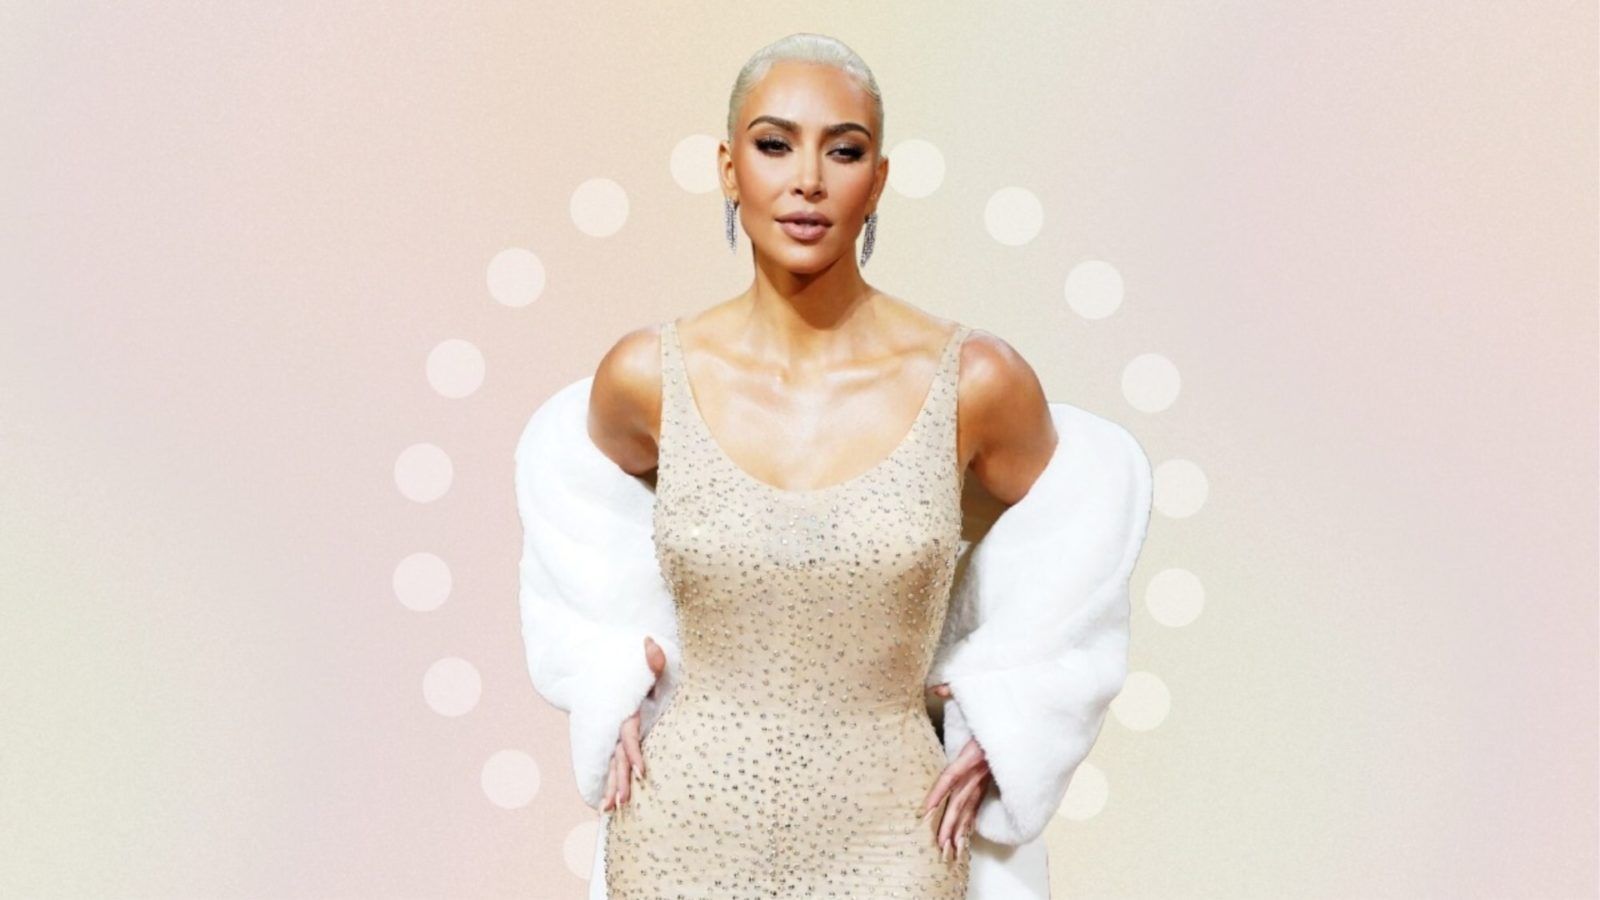 Why Kim Kardashian’s drastic weight loss for the Met Gala is concerning